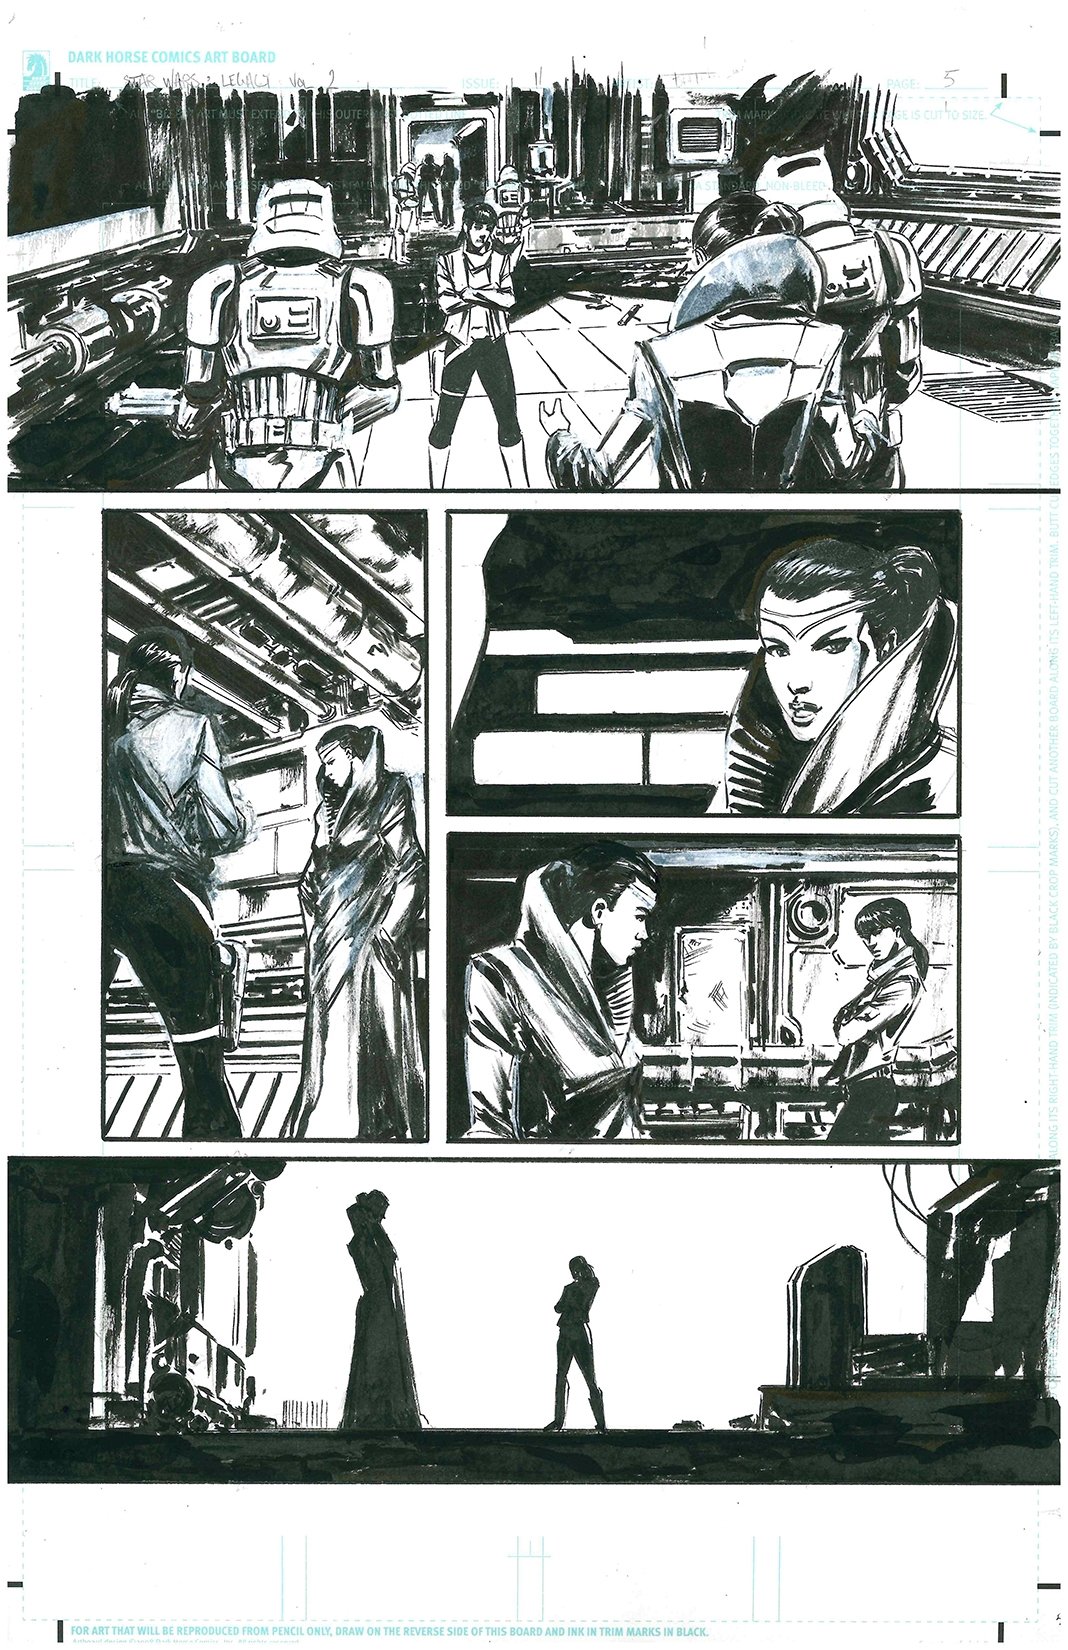 Star Wars: Legacy (Vol. 2), Issue 16, Page 05, in Jeffrey